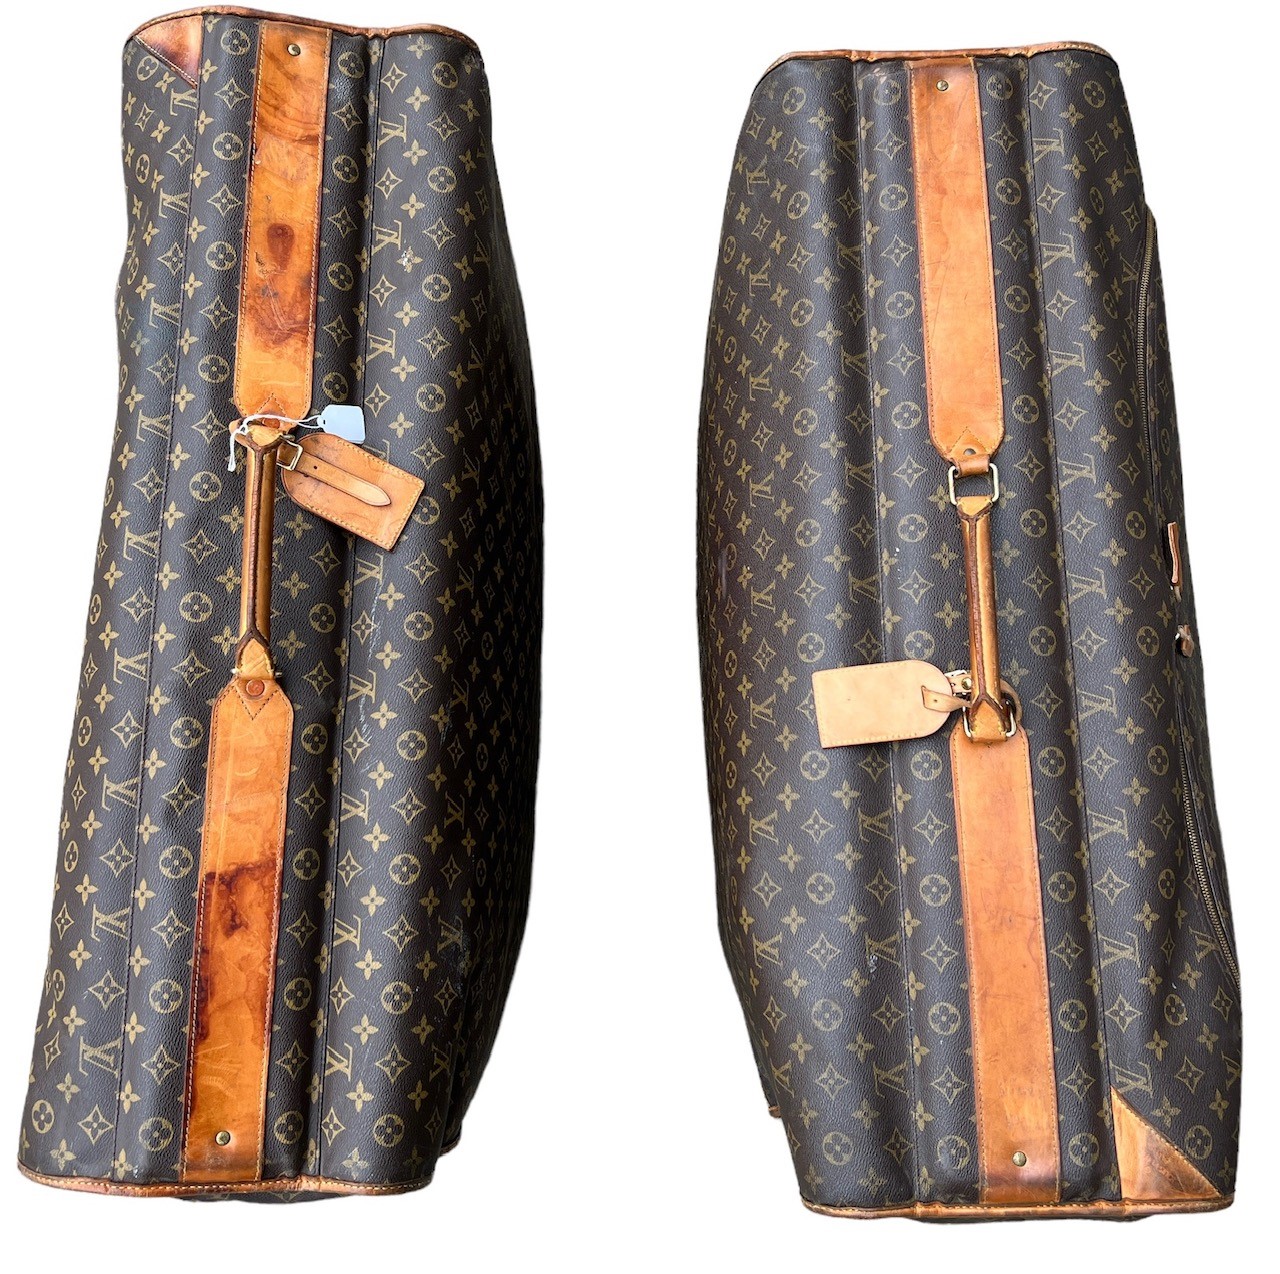 LOUIS VUITTON, A SET OF TWO LARGE CLASSIC LEATHER MONOGRAM SUITCASES Made America, 1995, number: - Image 5 of 5